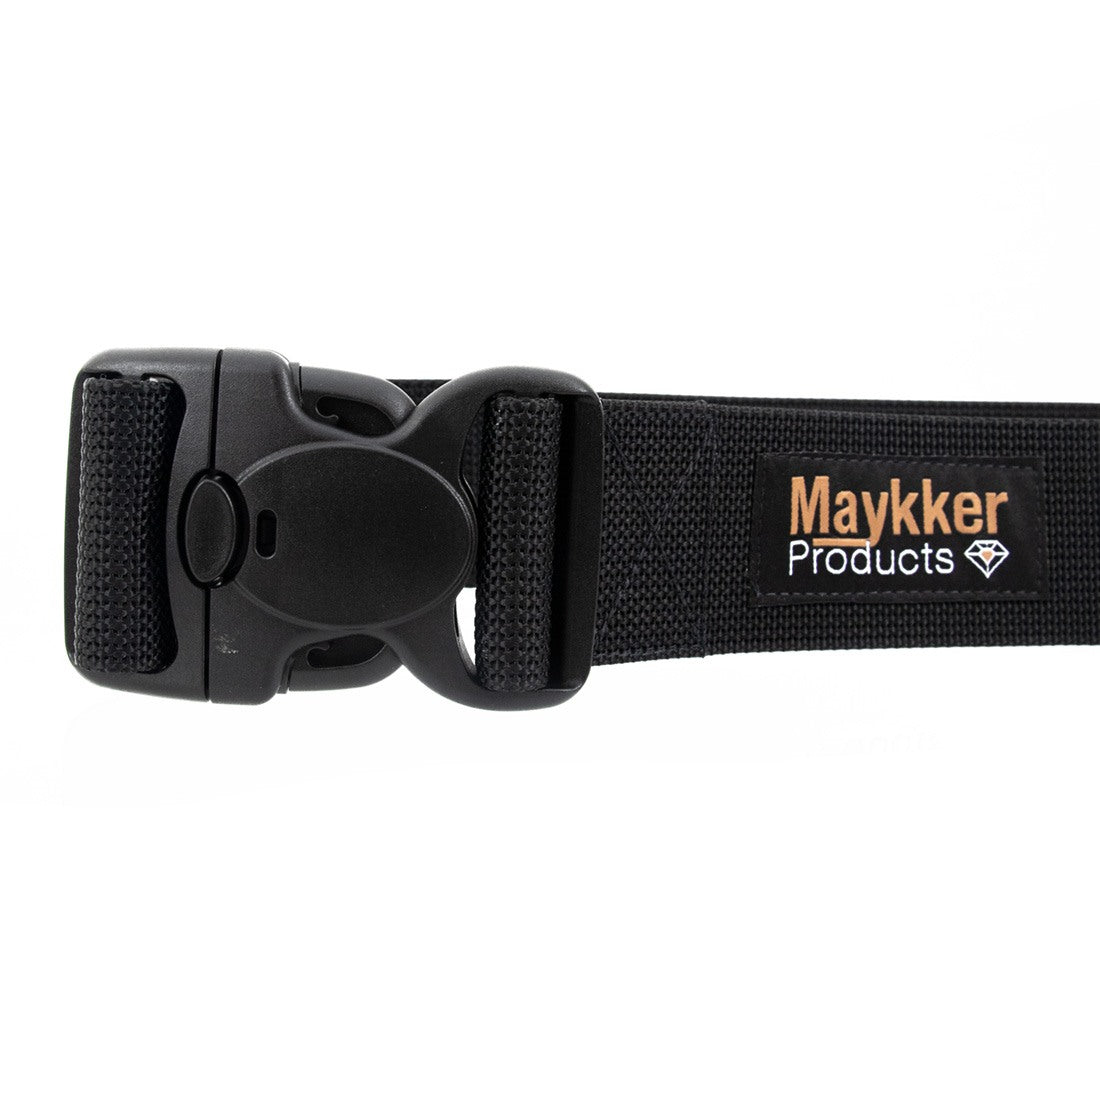 Maykker Trident Belt - Buckle and Logo Close-Up View